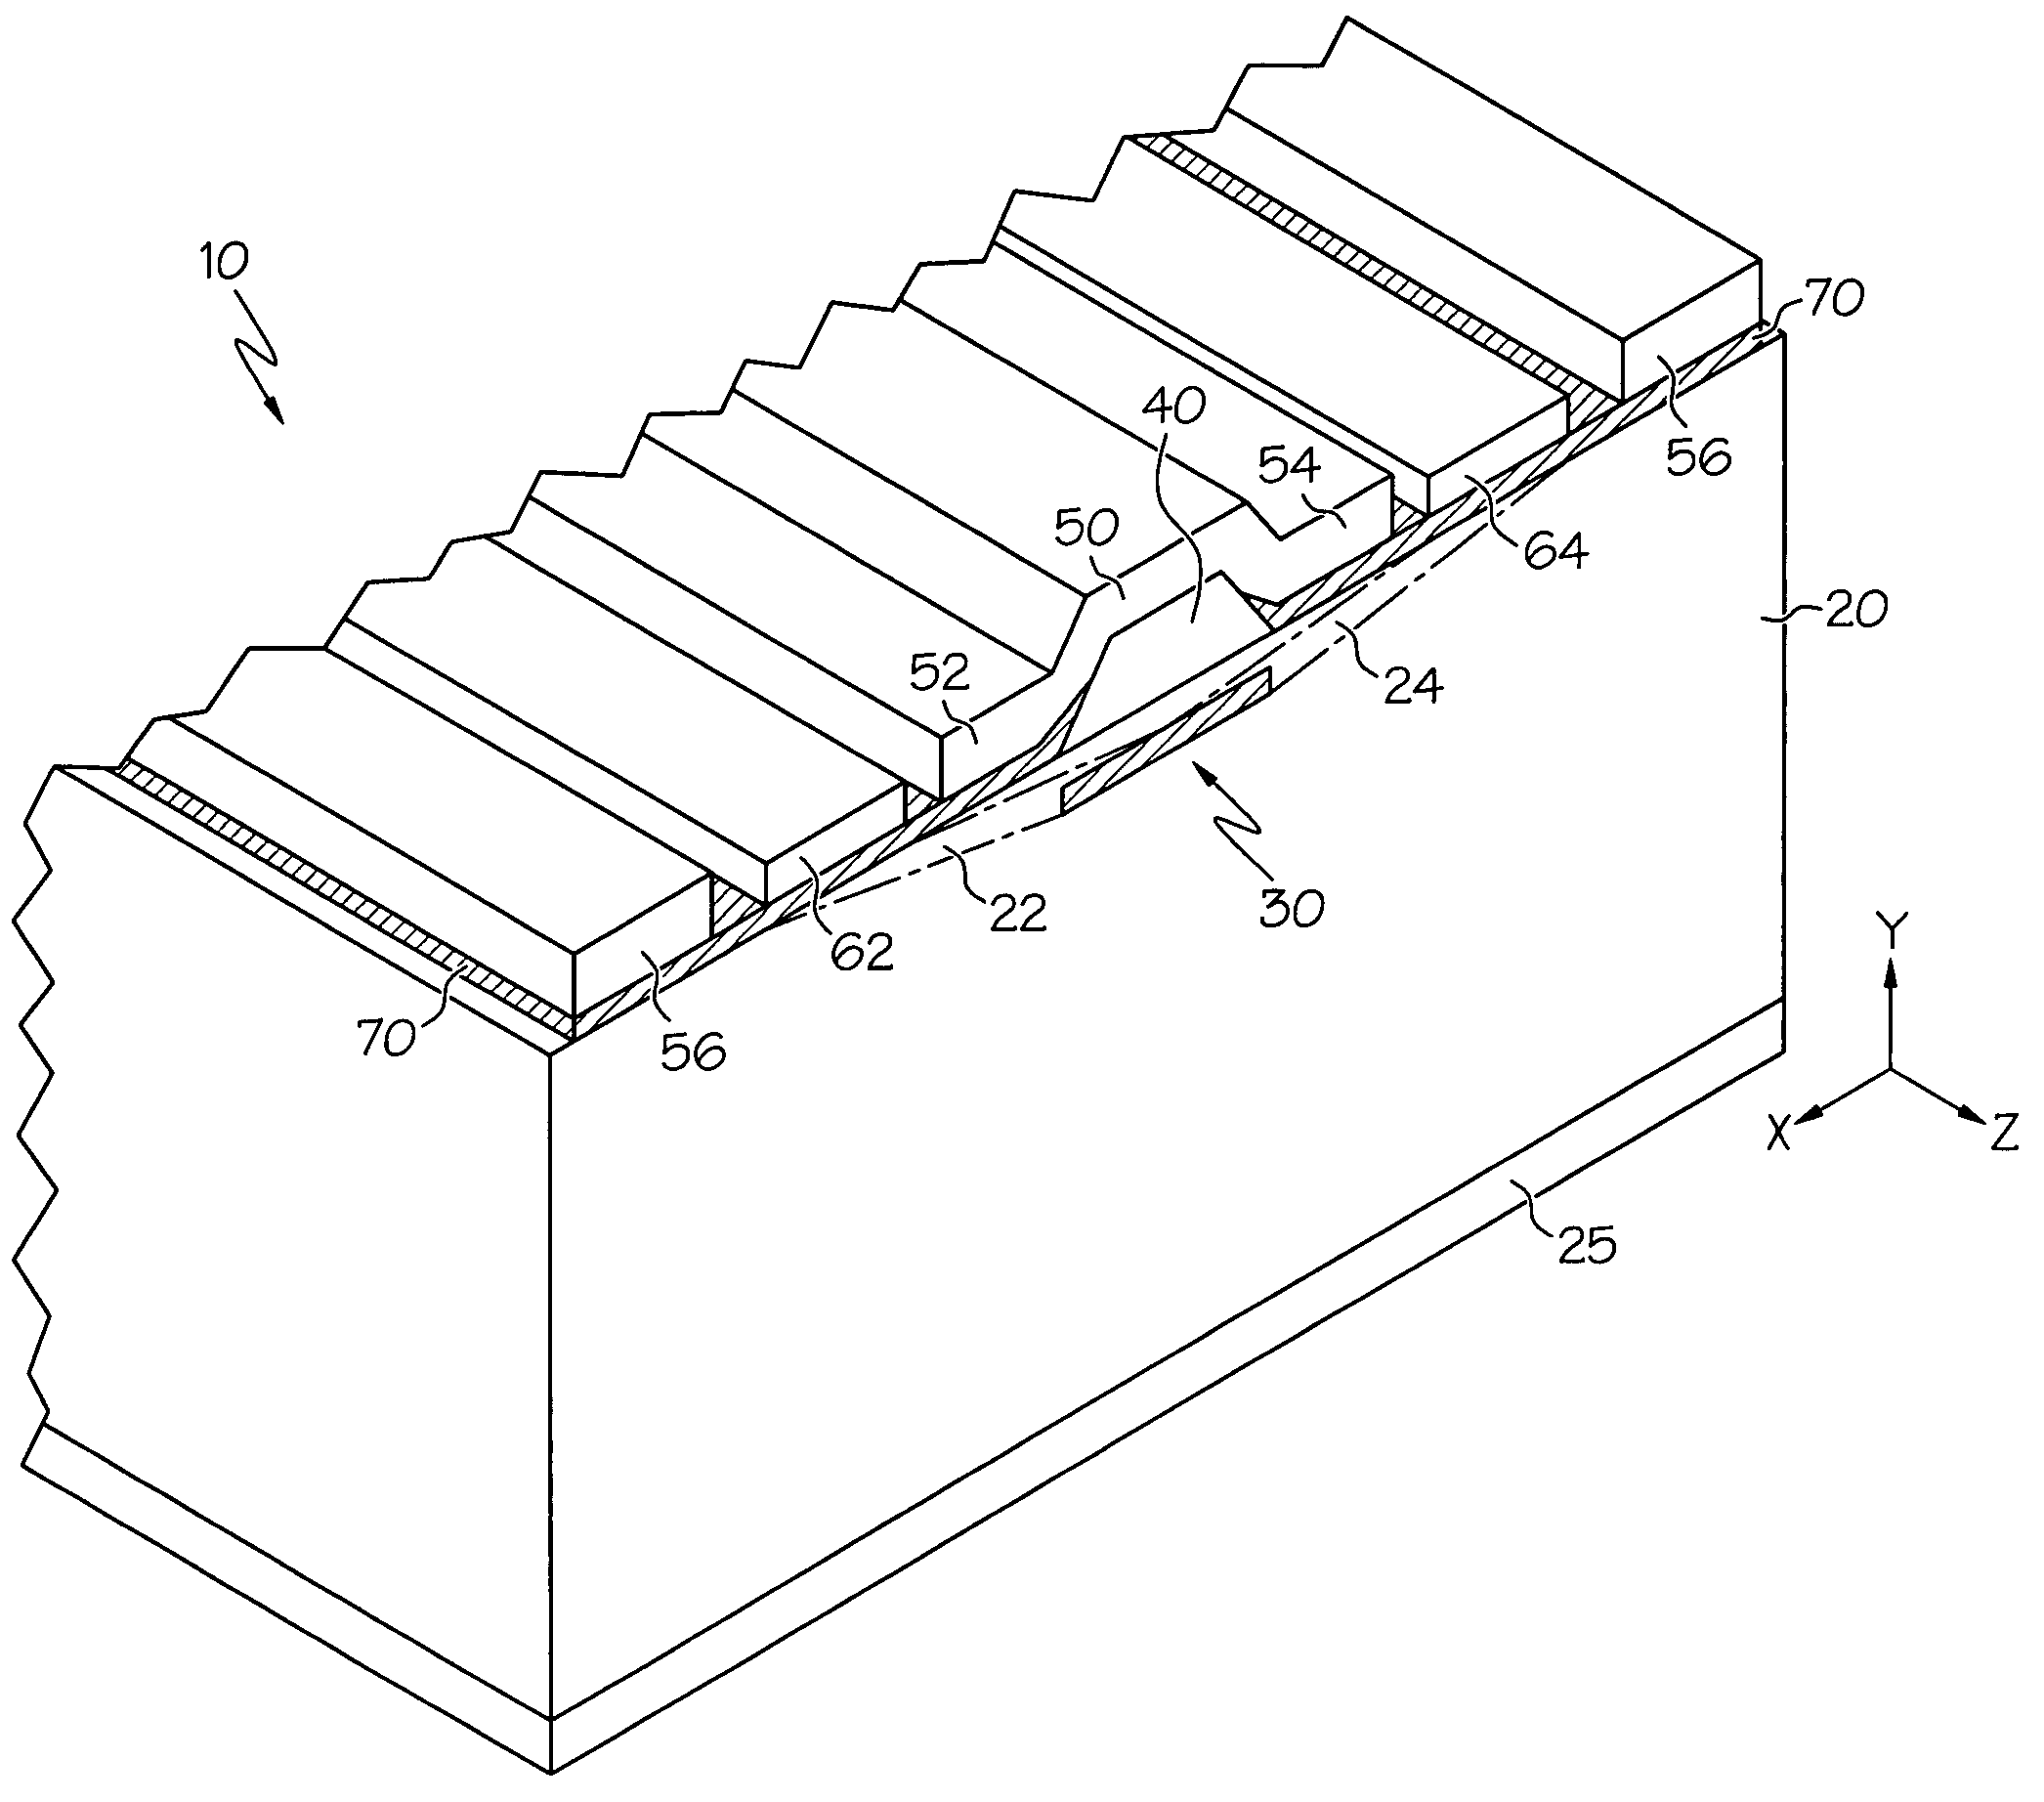 Semiconductor laser micro-heating element structure